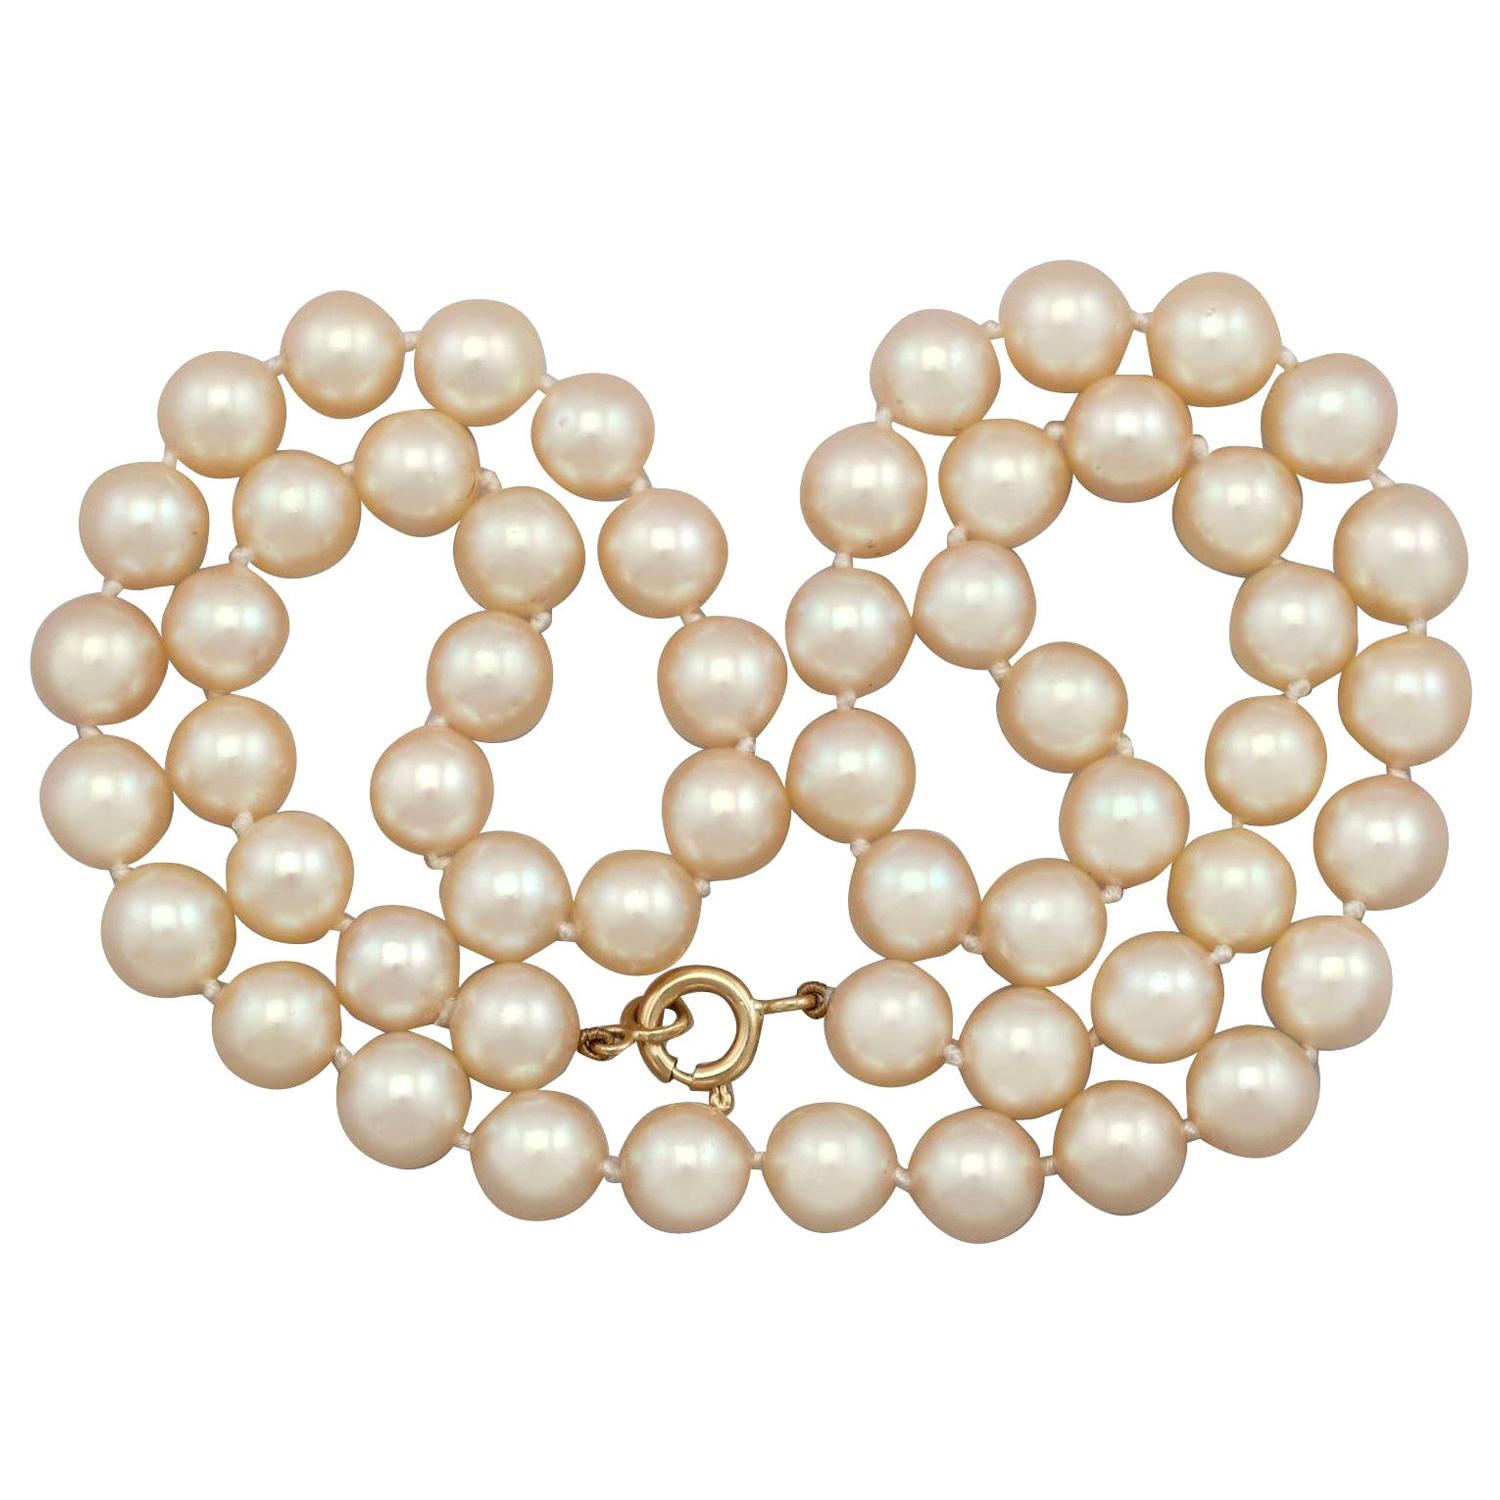 What is a pearl clasp?